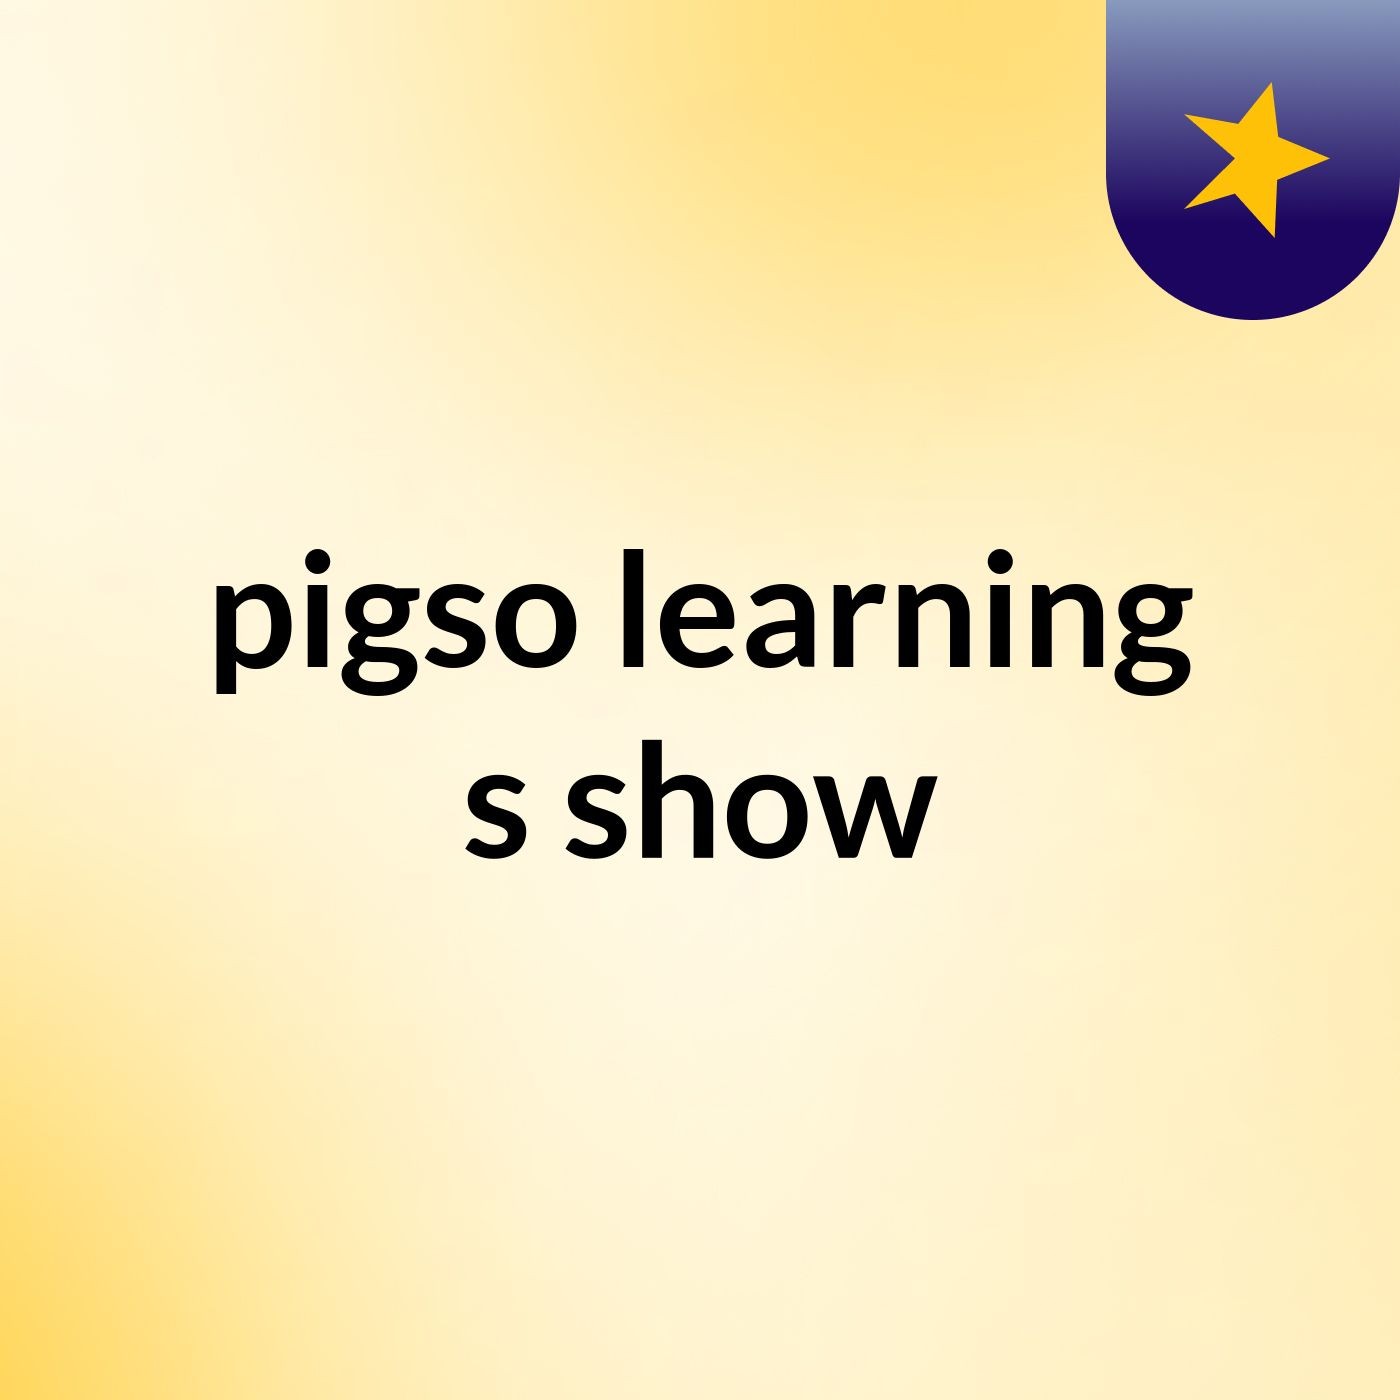 pigso learning's show